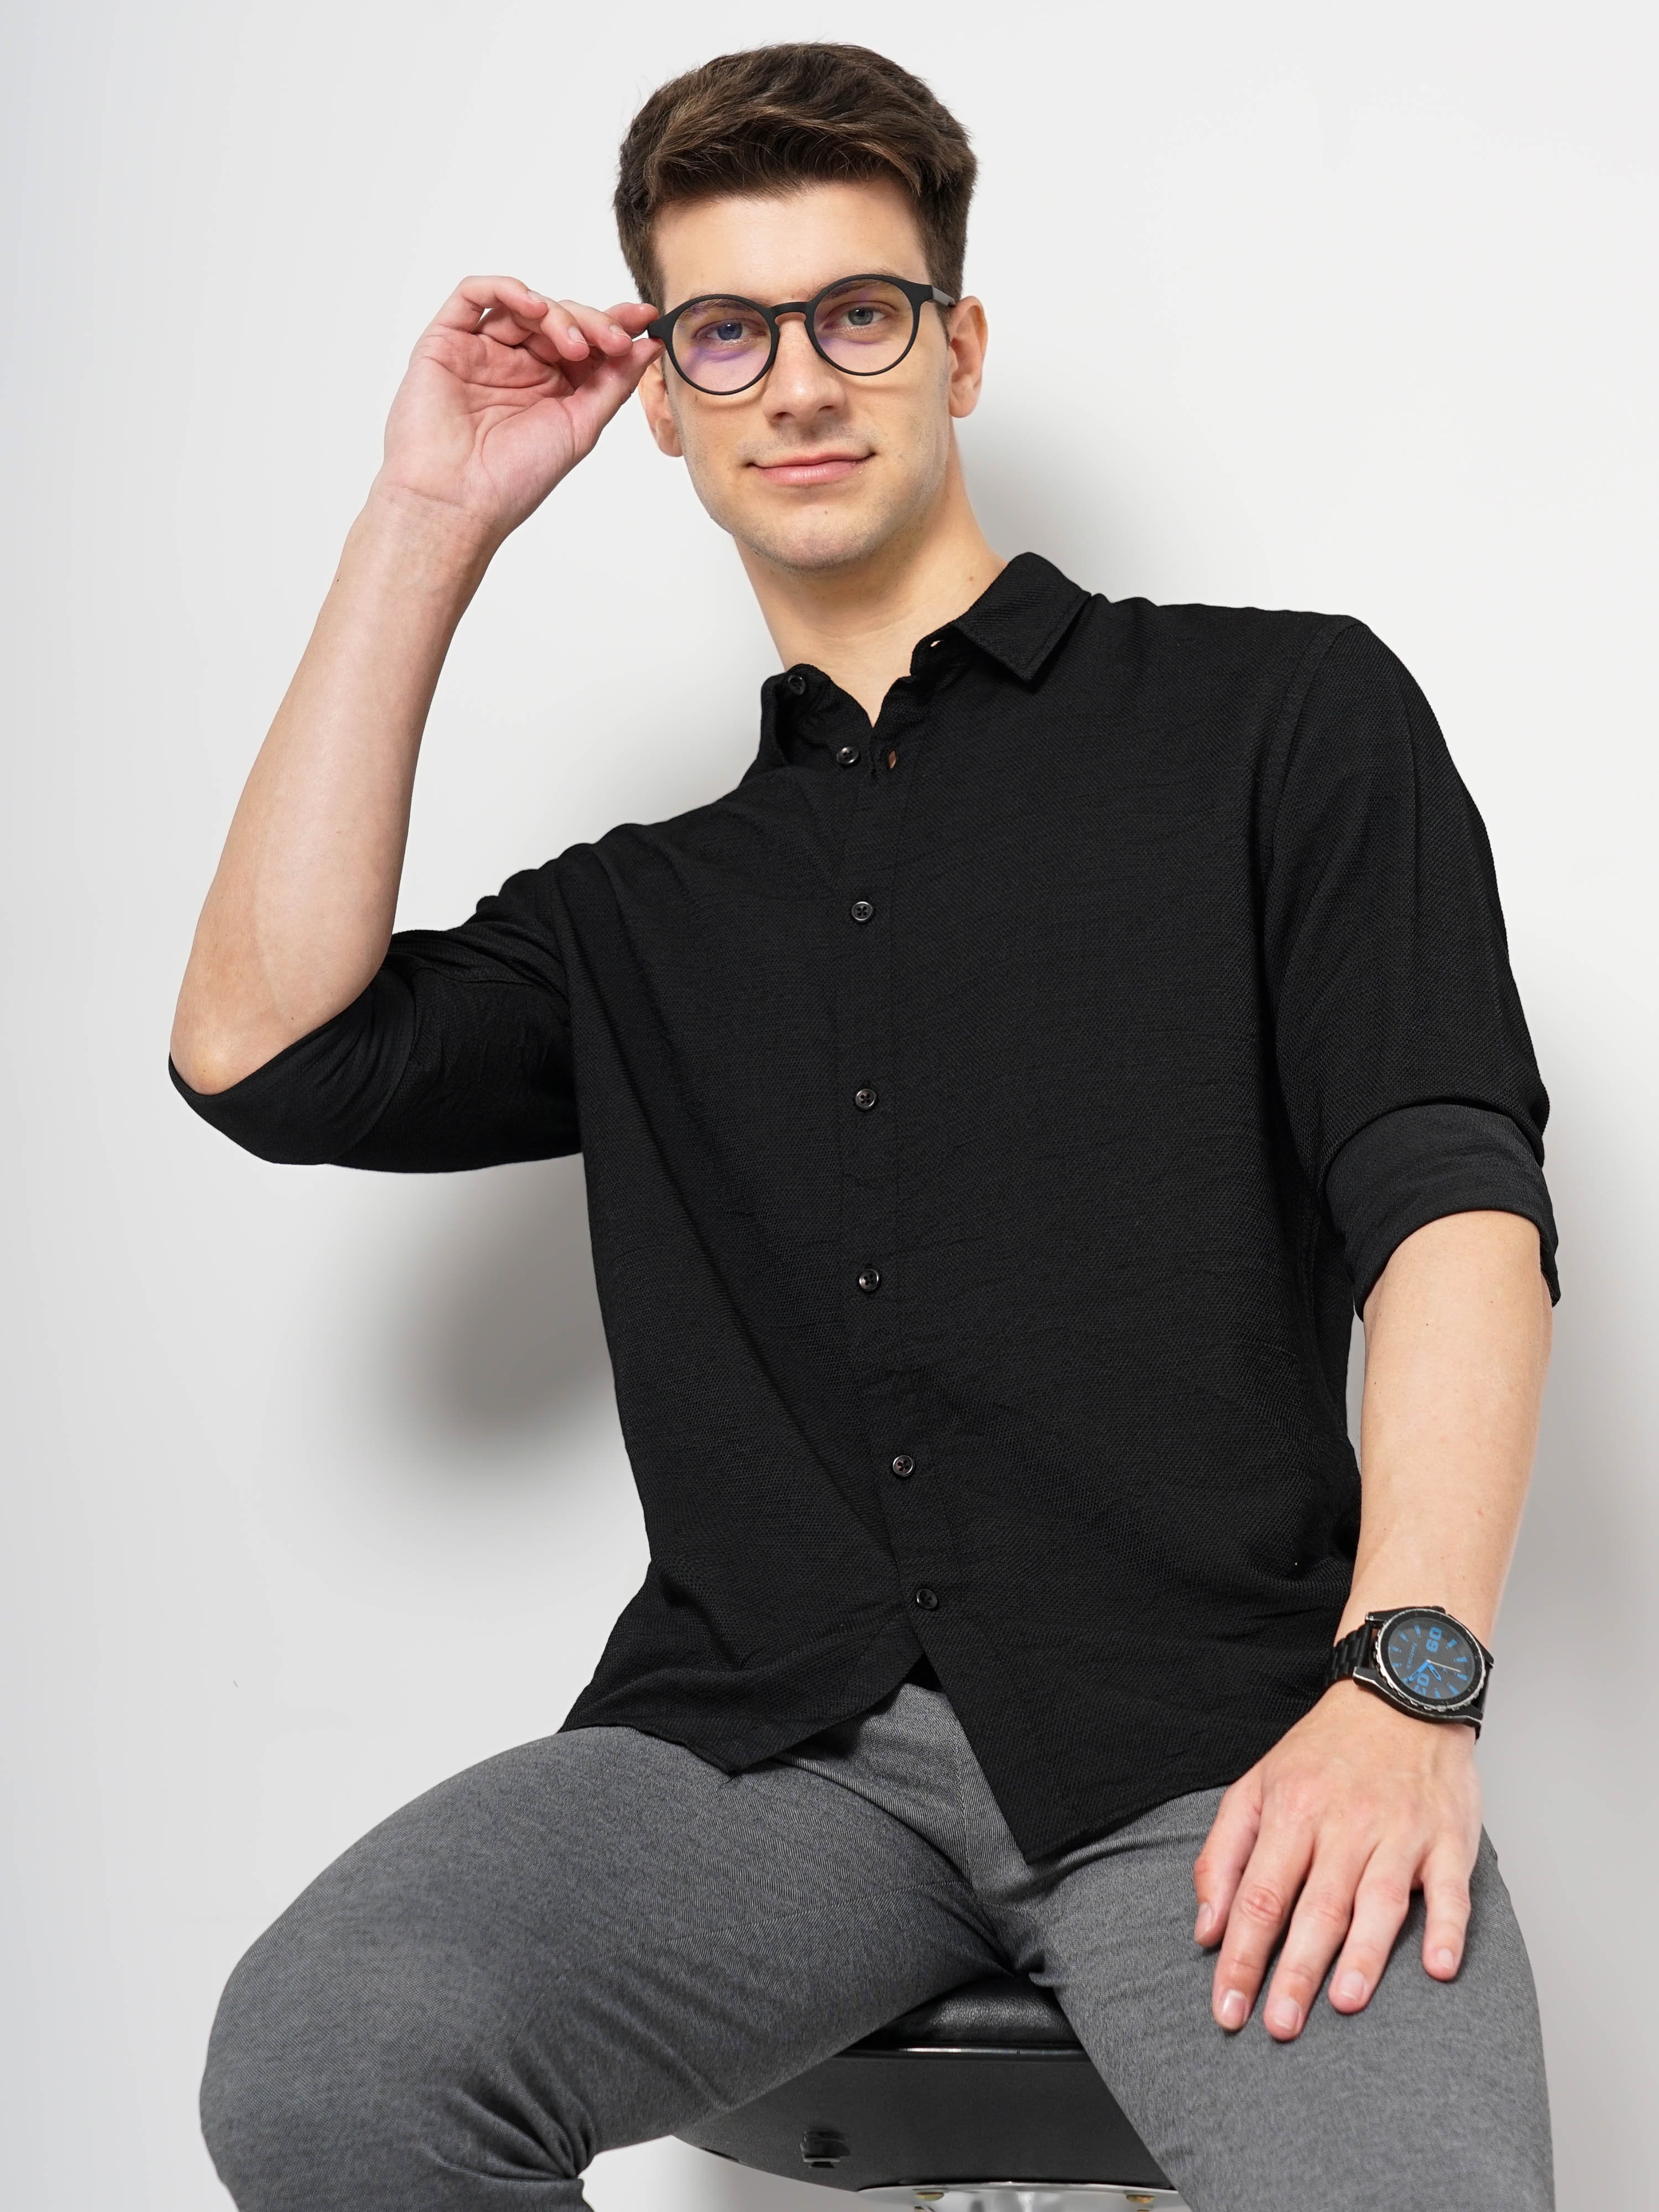 Men's Black Solid Casual Shirts